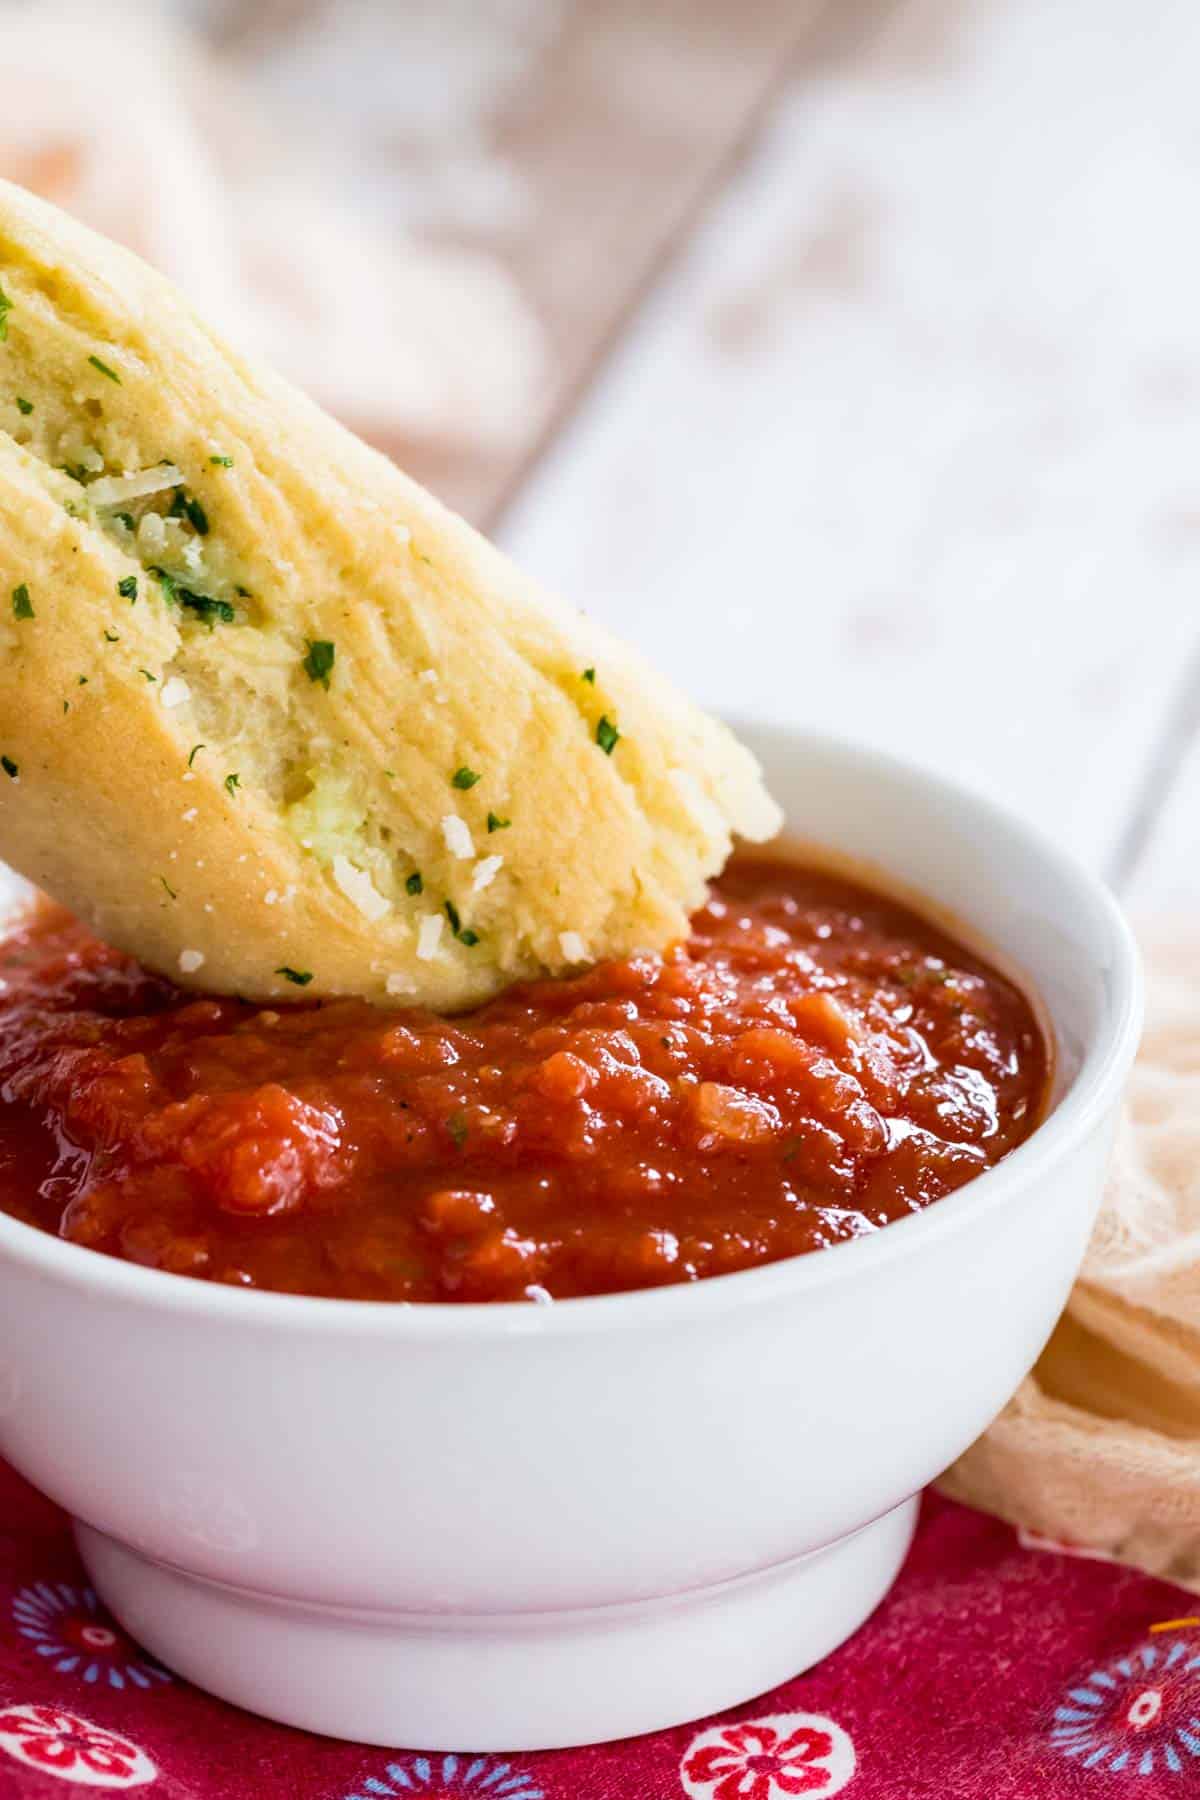 A breadstick is dipped into a bowl of homemade marinara sauce.